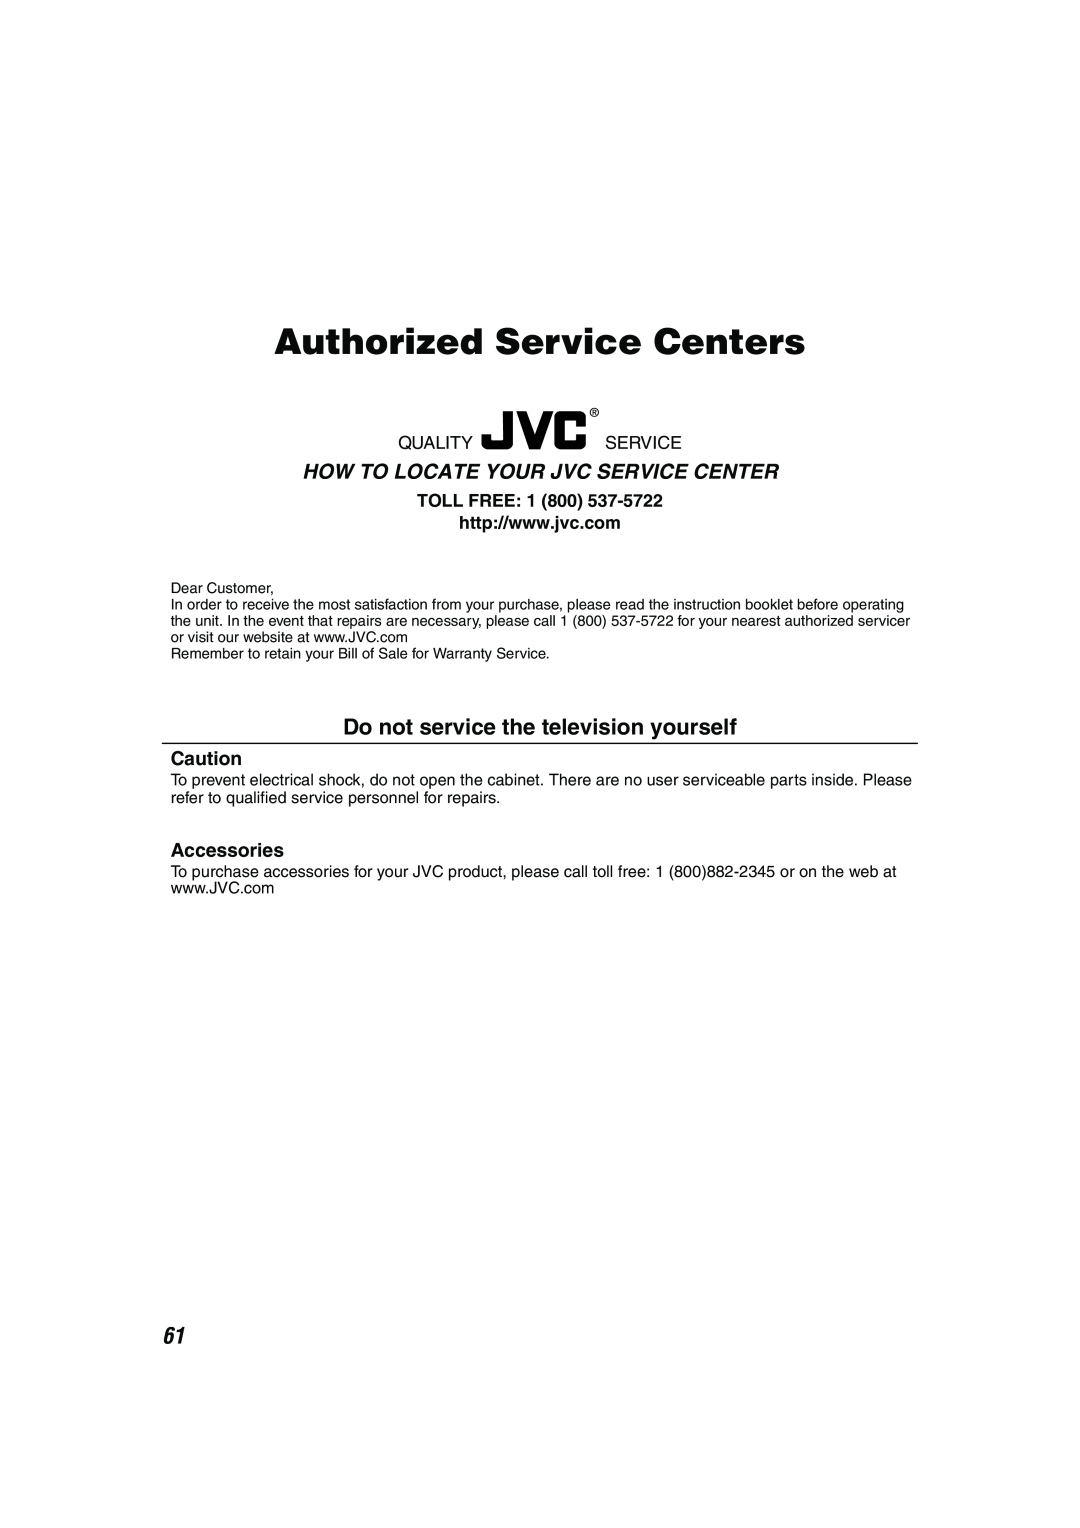 JVC TH-M42 Authorized Service Centers, Accessories, TOLL FREE 1 800, Do not service the television yourself, Dear Customer 